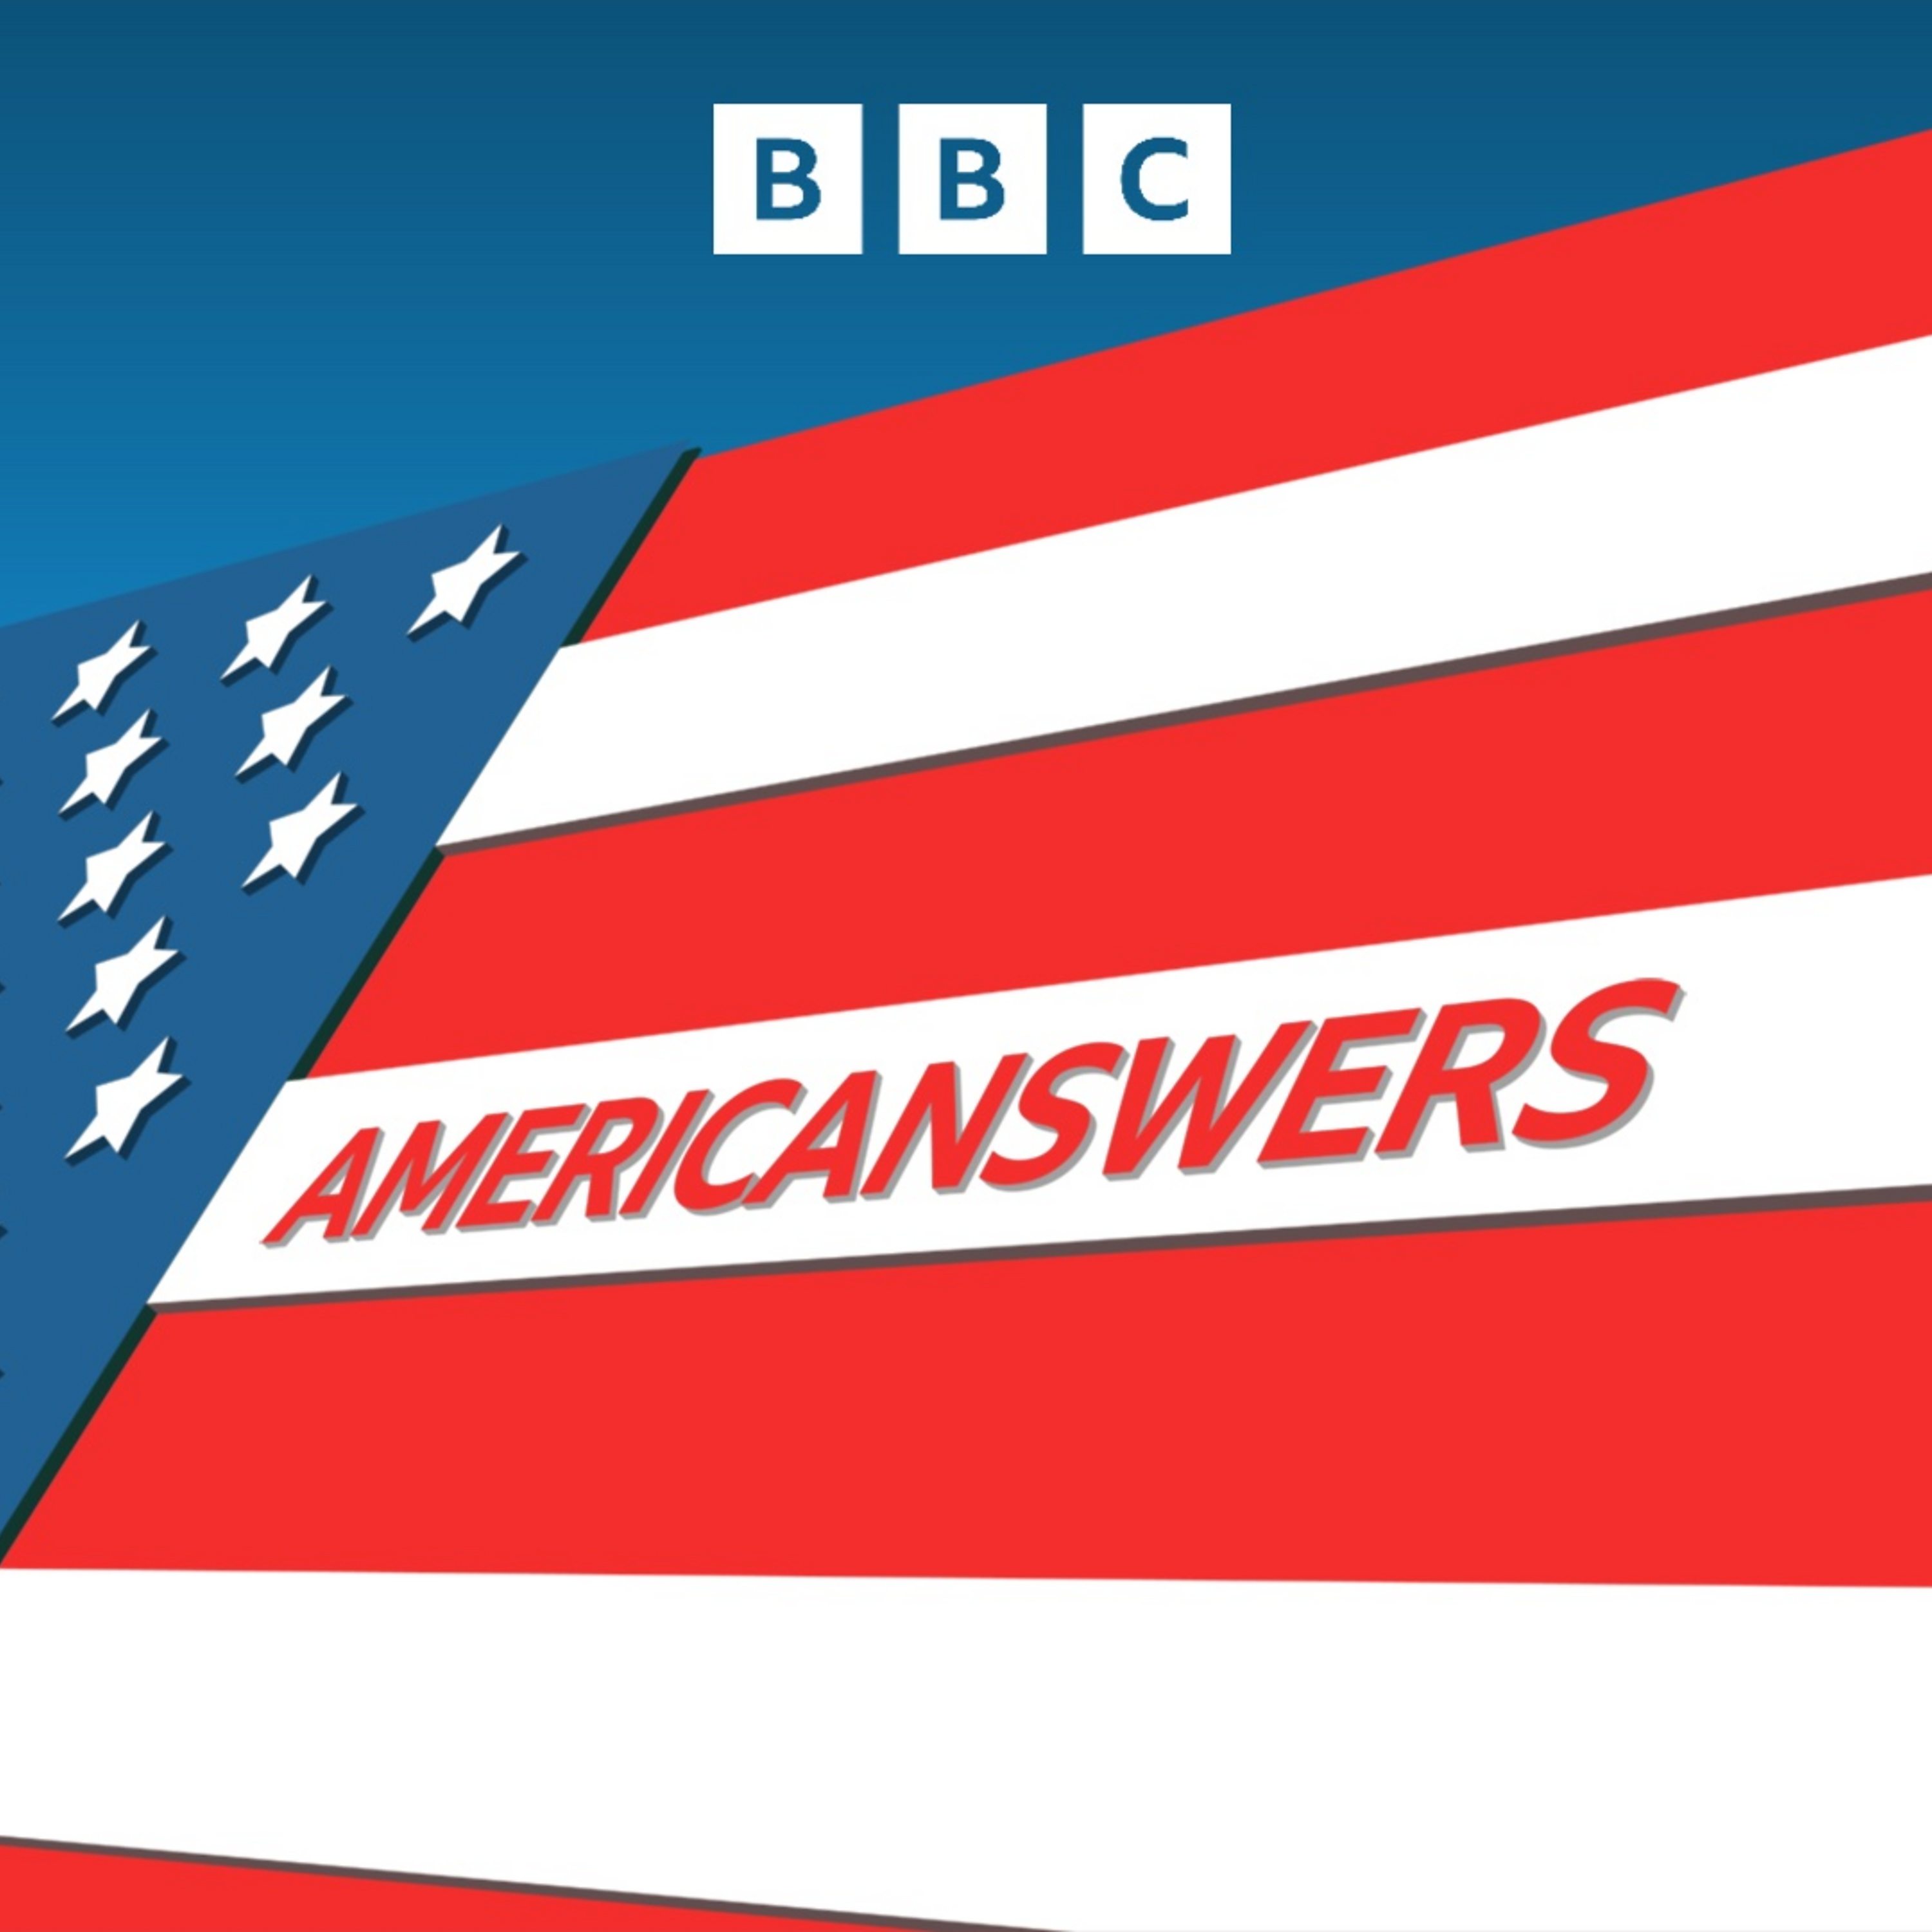 Americanswers! VP picks, Nikki Haley’s back, and could Trump do three terms?